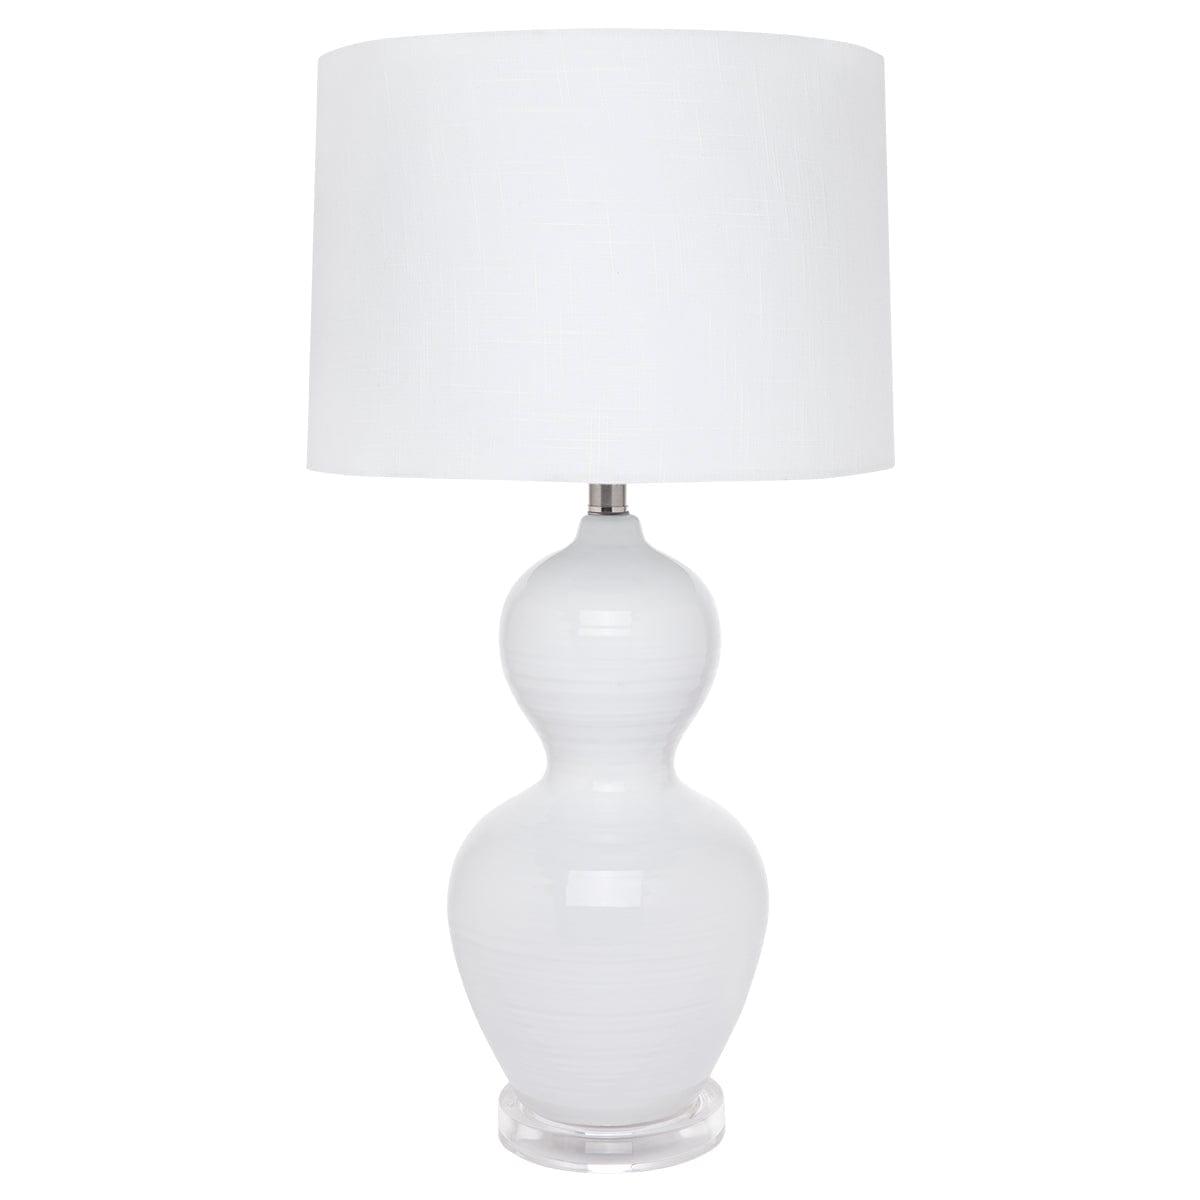 House Journey Table Lamp Bronte Table Lamp - White